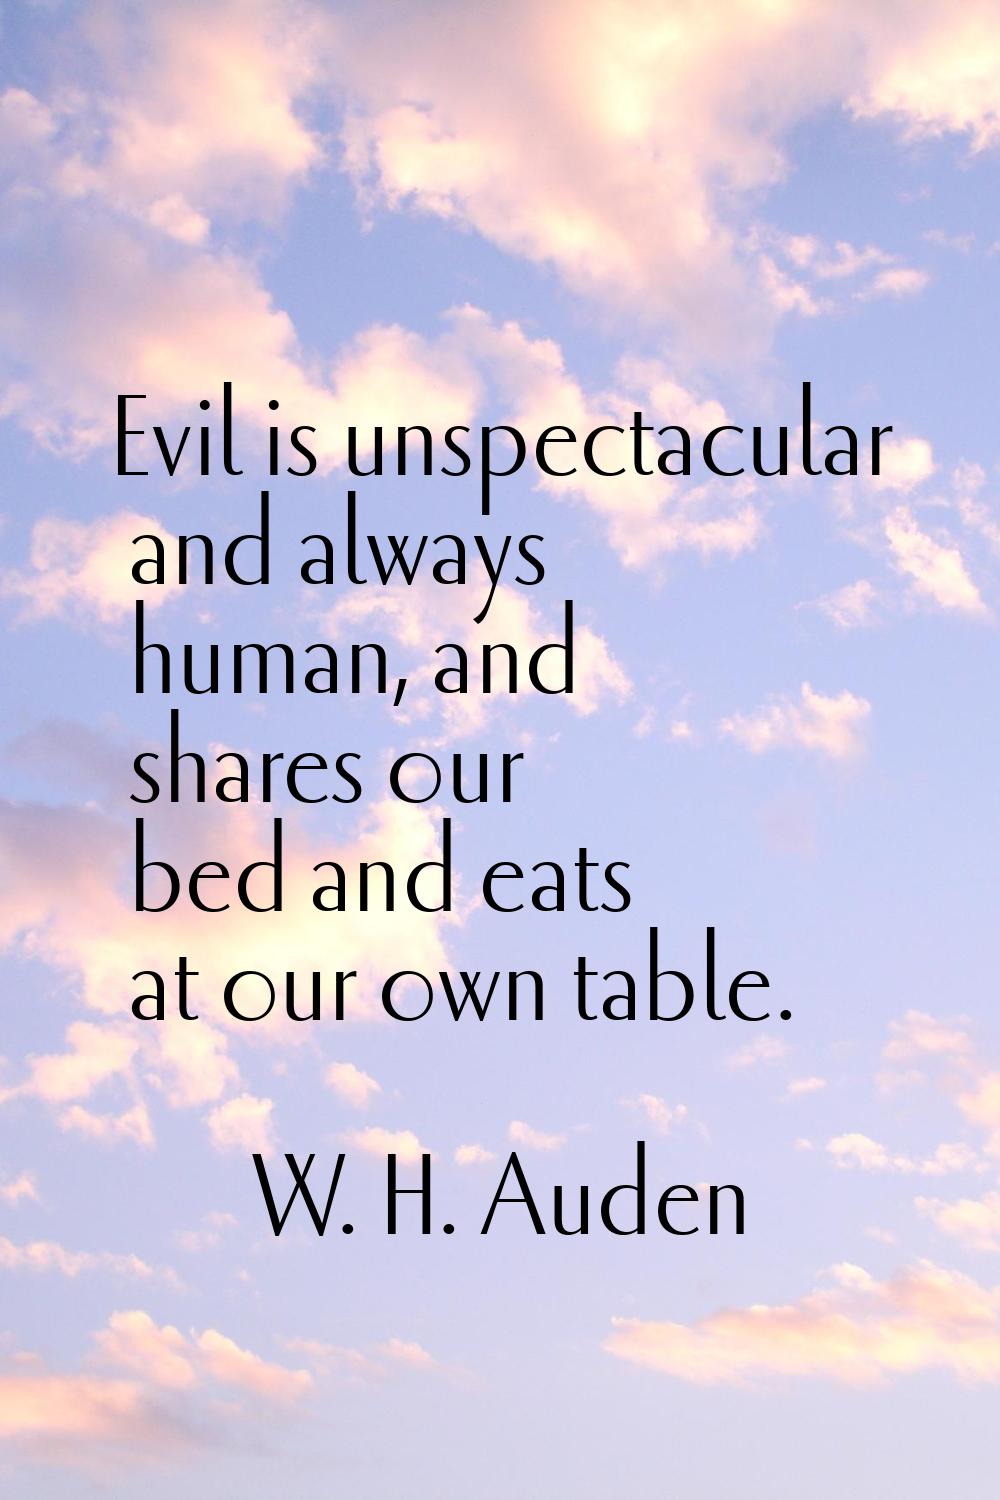 Evil is unspectacular and always human, and shares our bed and eats at our own table.